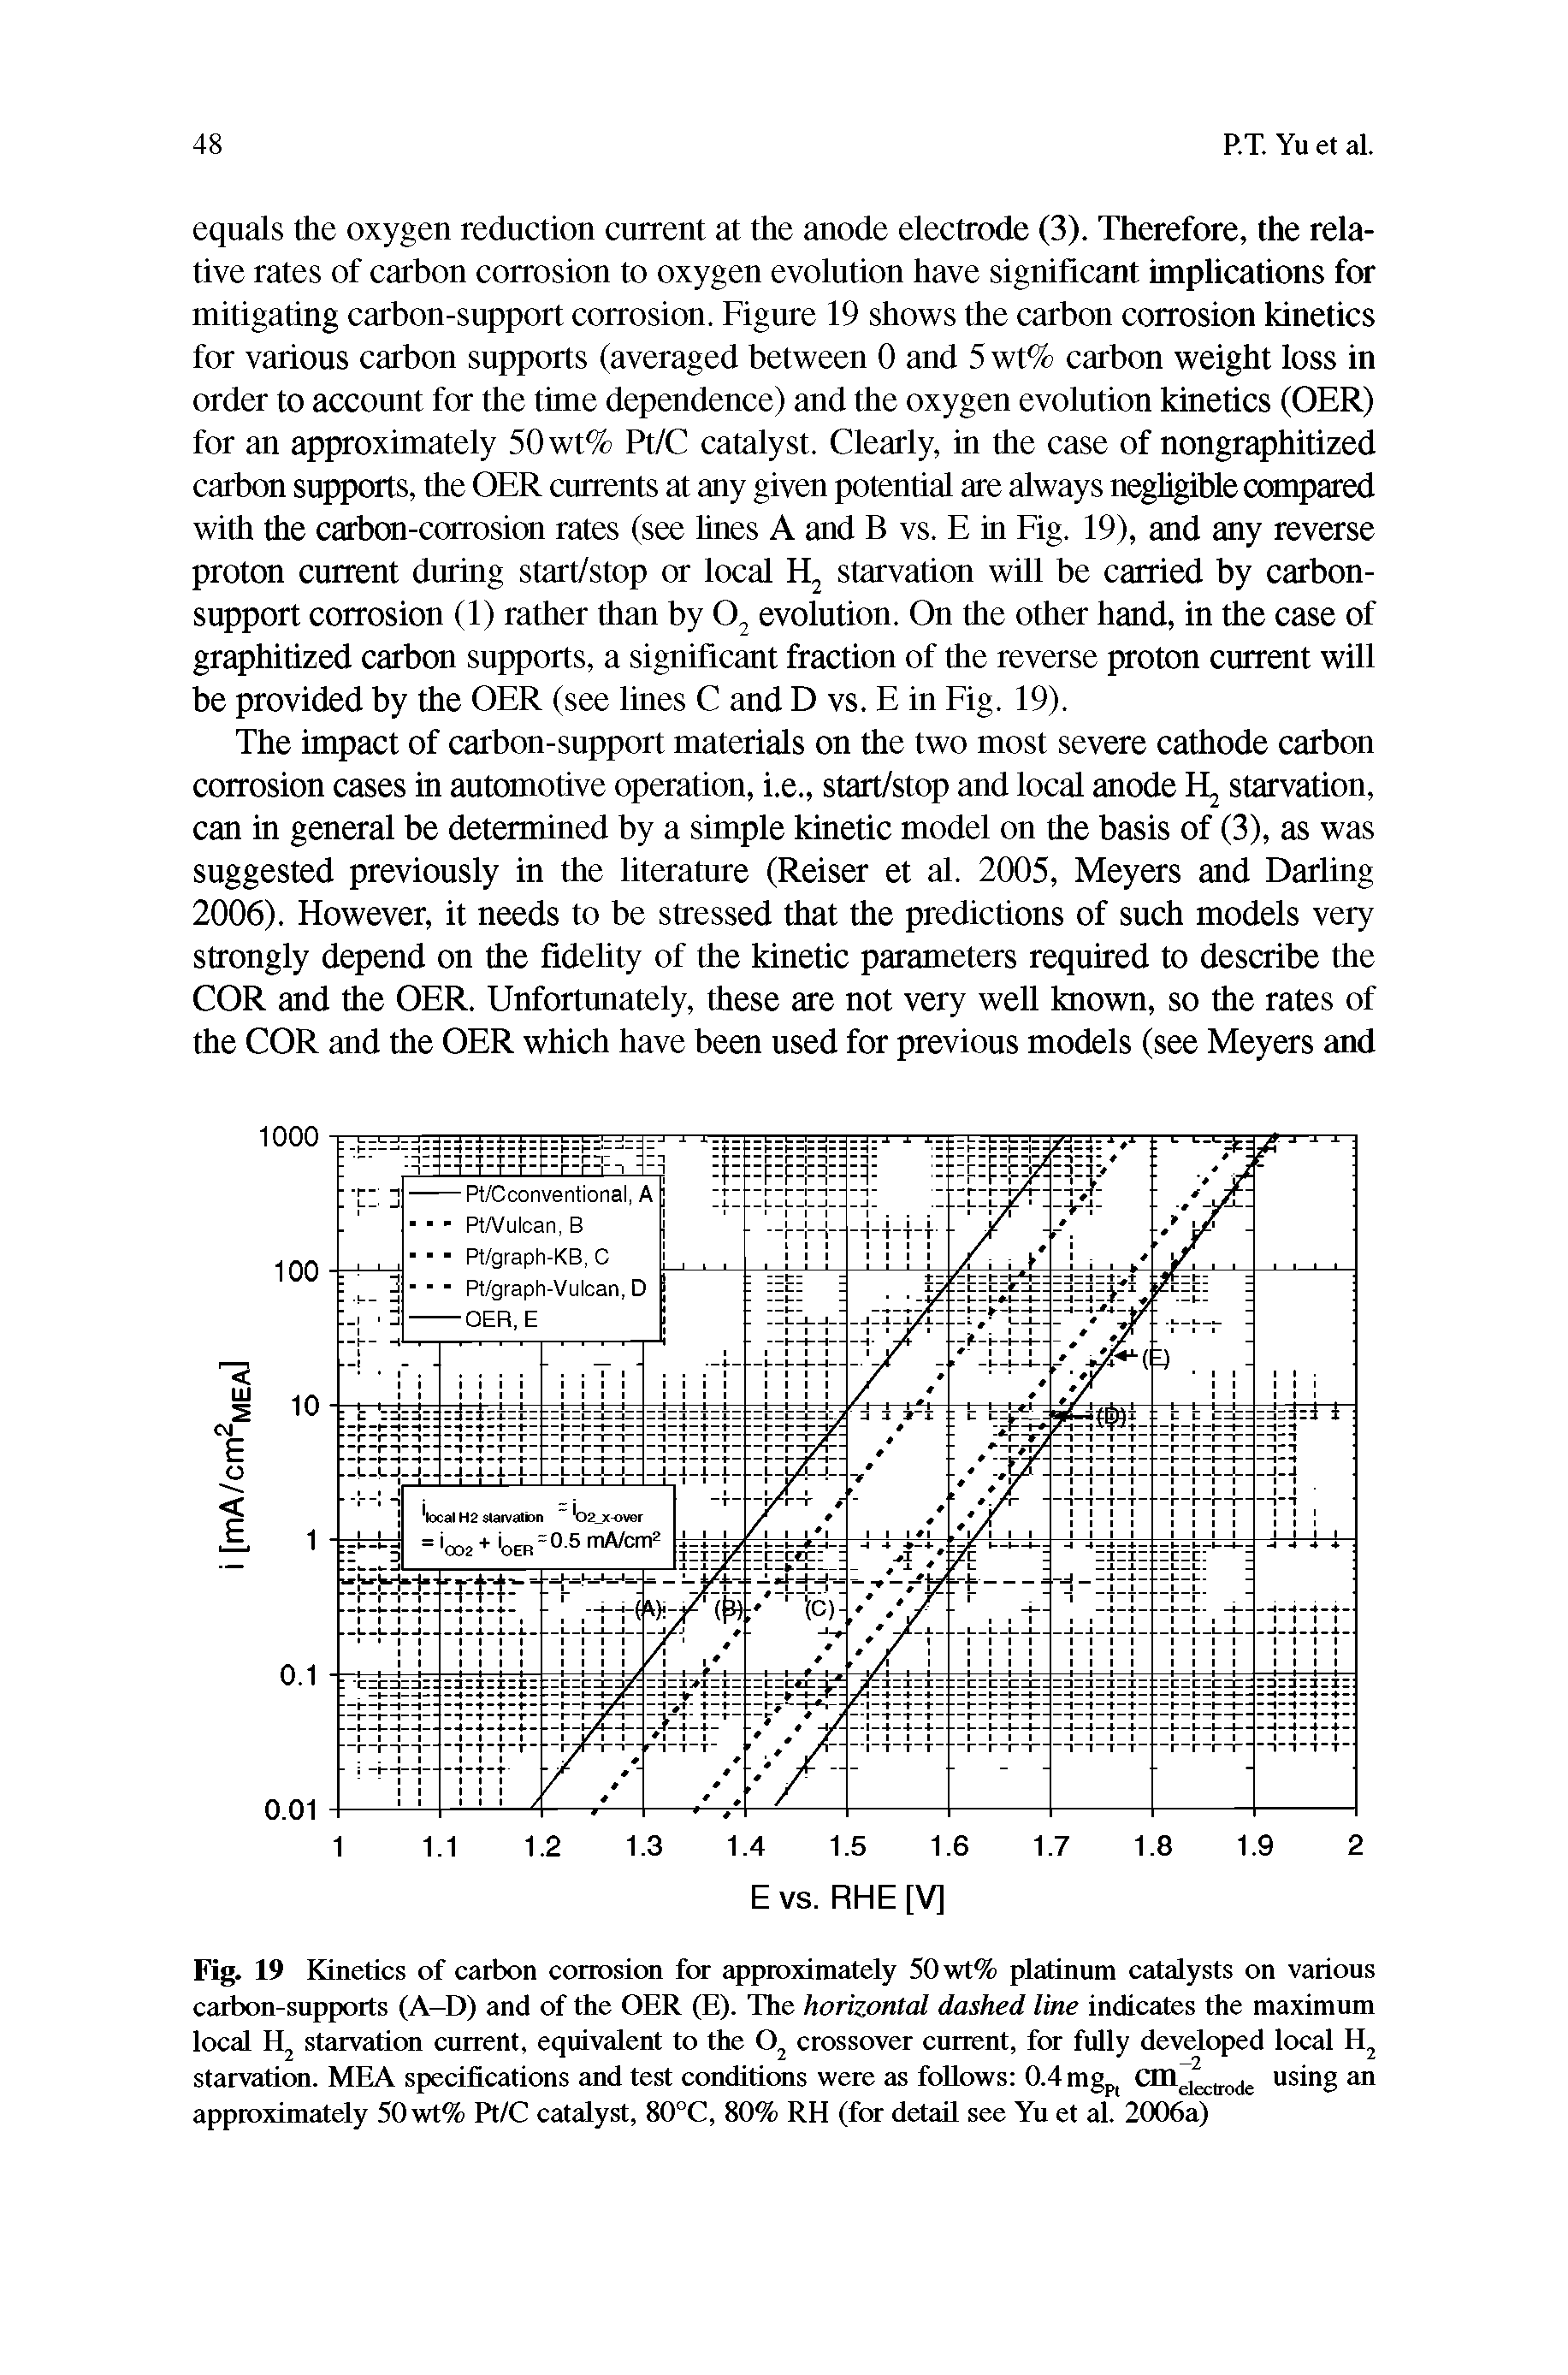 Fig. 19 Kinetics of carbon corrosion for approximately 50wt% platinum catalysts on various carbon-supports (A-D) and of the OER (E). The horizontal dashed line indicates the maximum local Hj starvation current, equivalent to the crossover current, for fully developed local starvation. MEA specifications and test conditions were as follows 0.4 mgp using an...